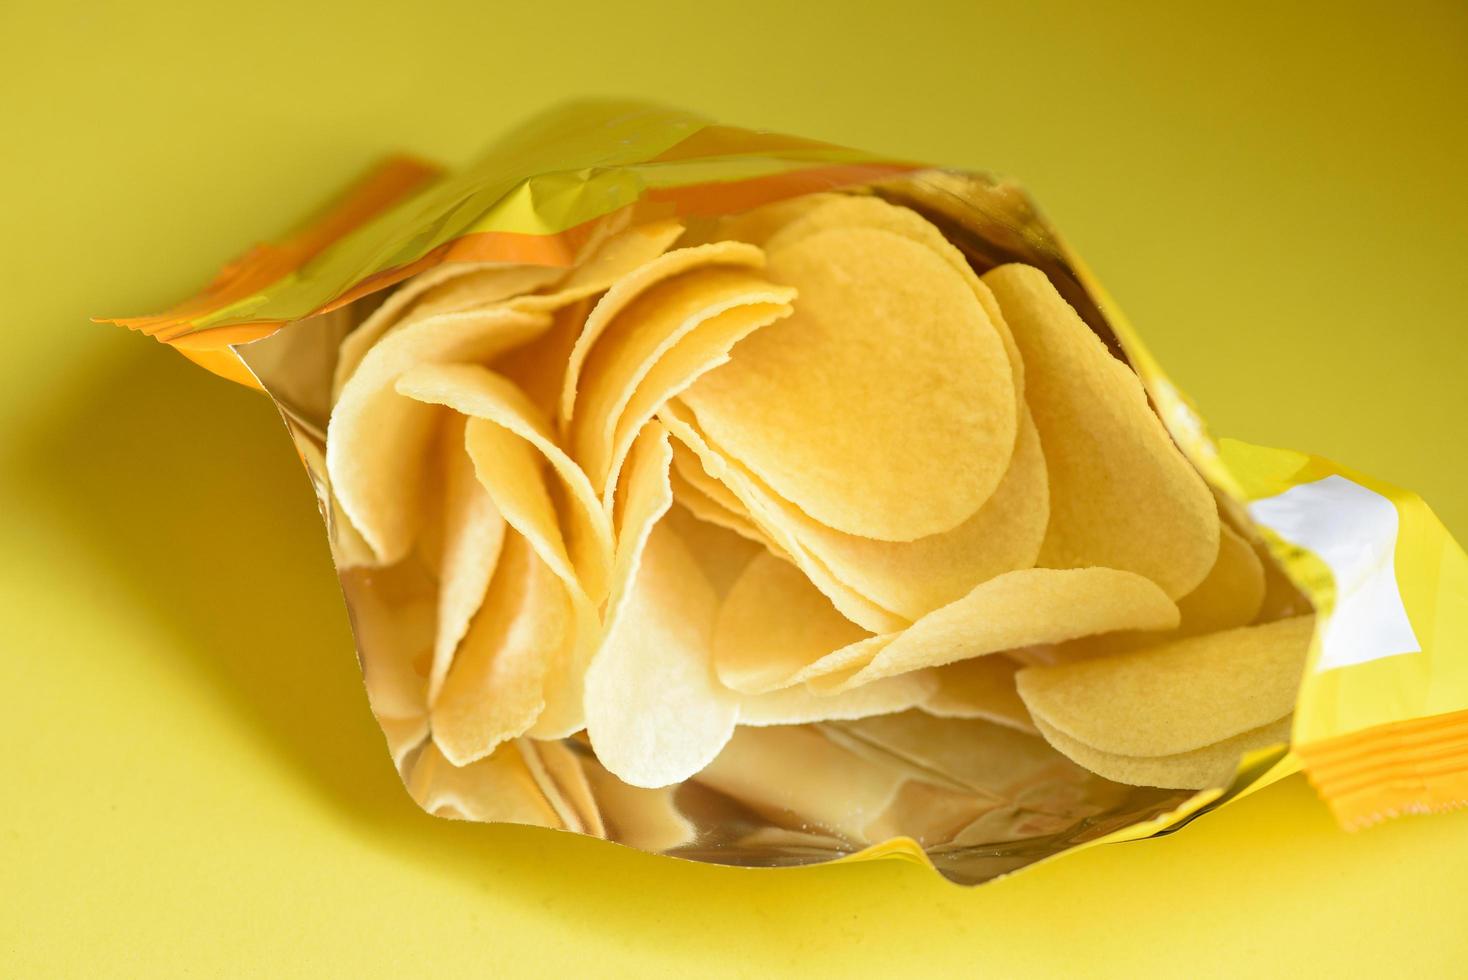 Potato chips on yellow background, Potato chips is snack in bag package wrapped in plastic ready to eat and fat food or junk food photo